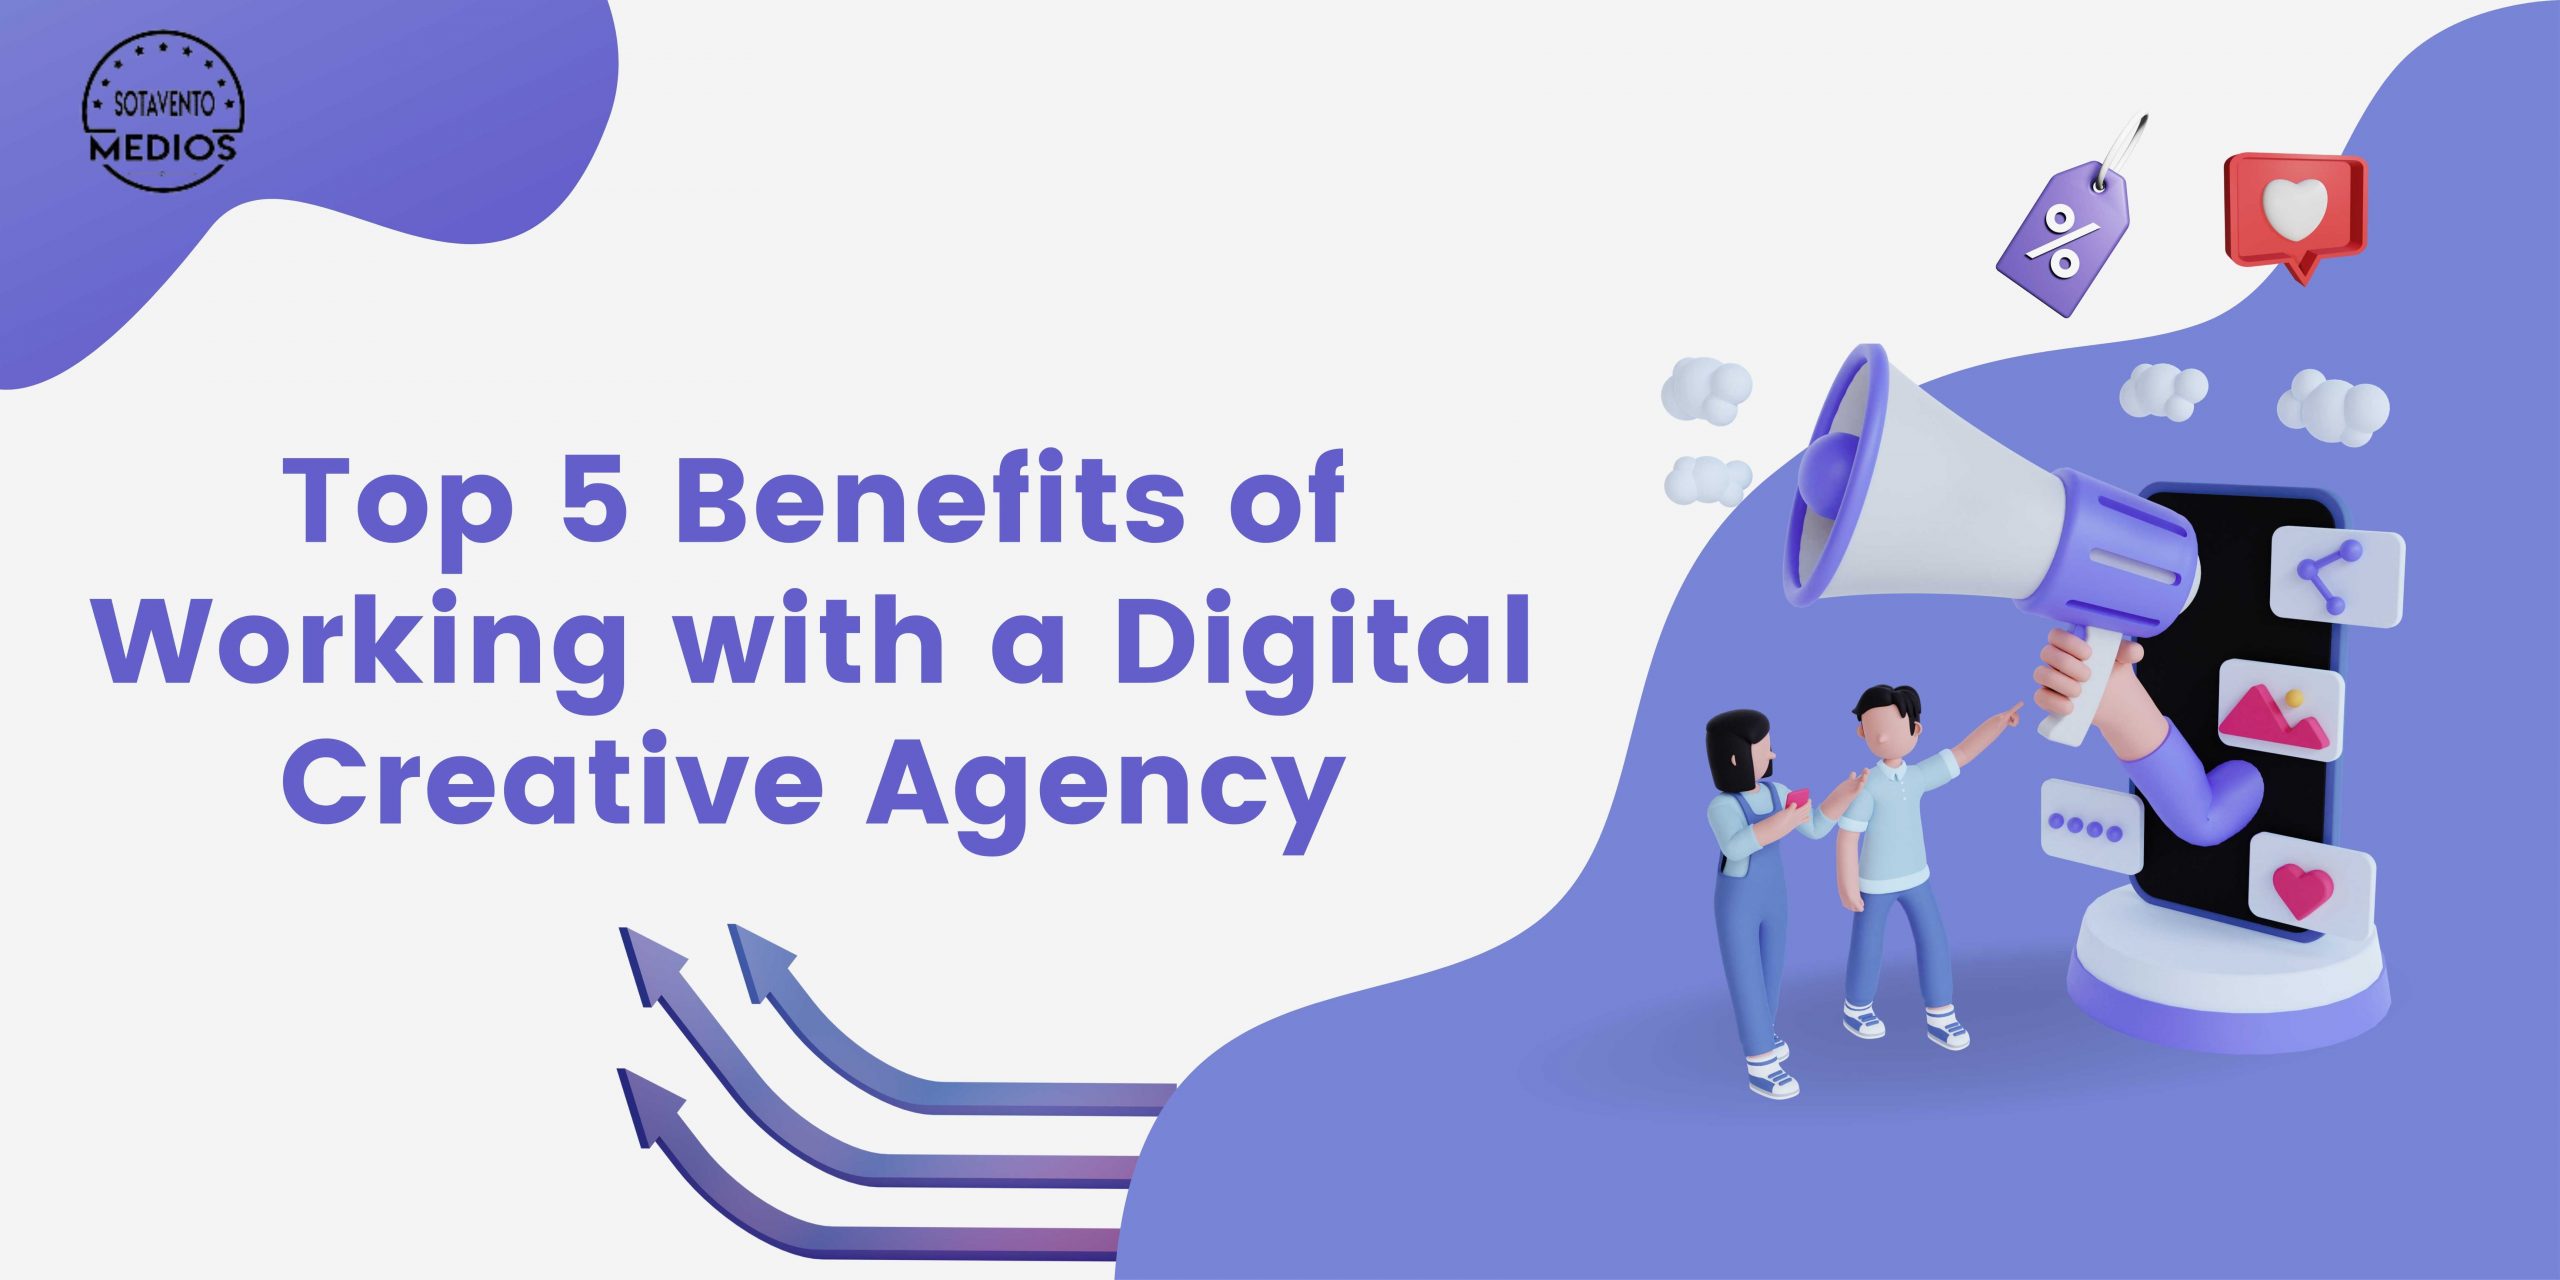 Top 5 Benefits of Working with a Digital Creative Agency